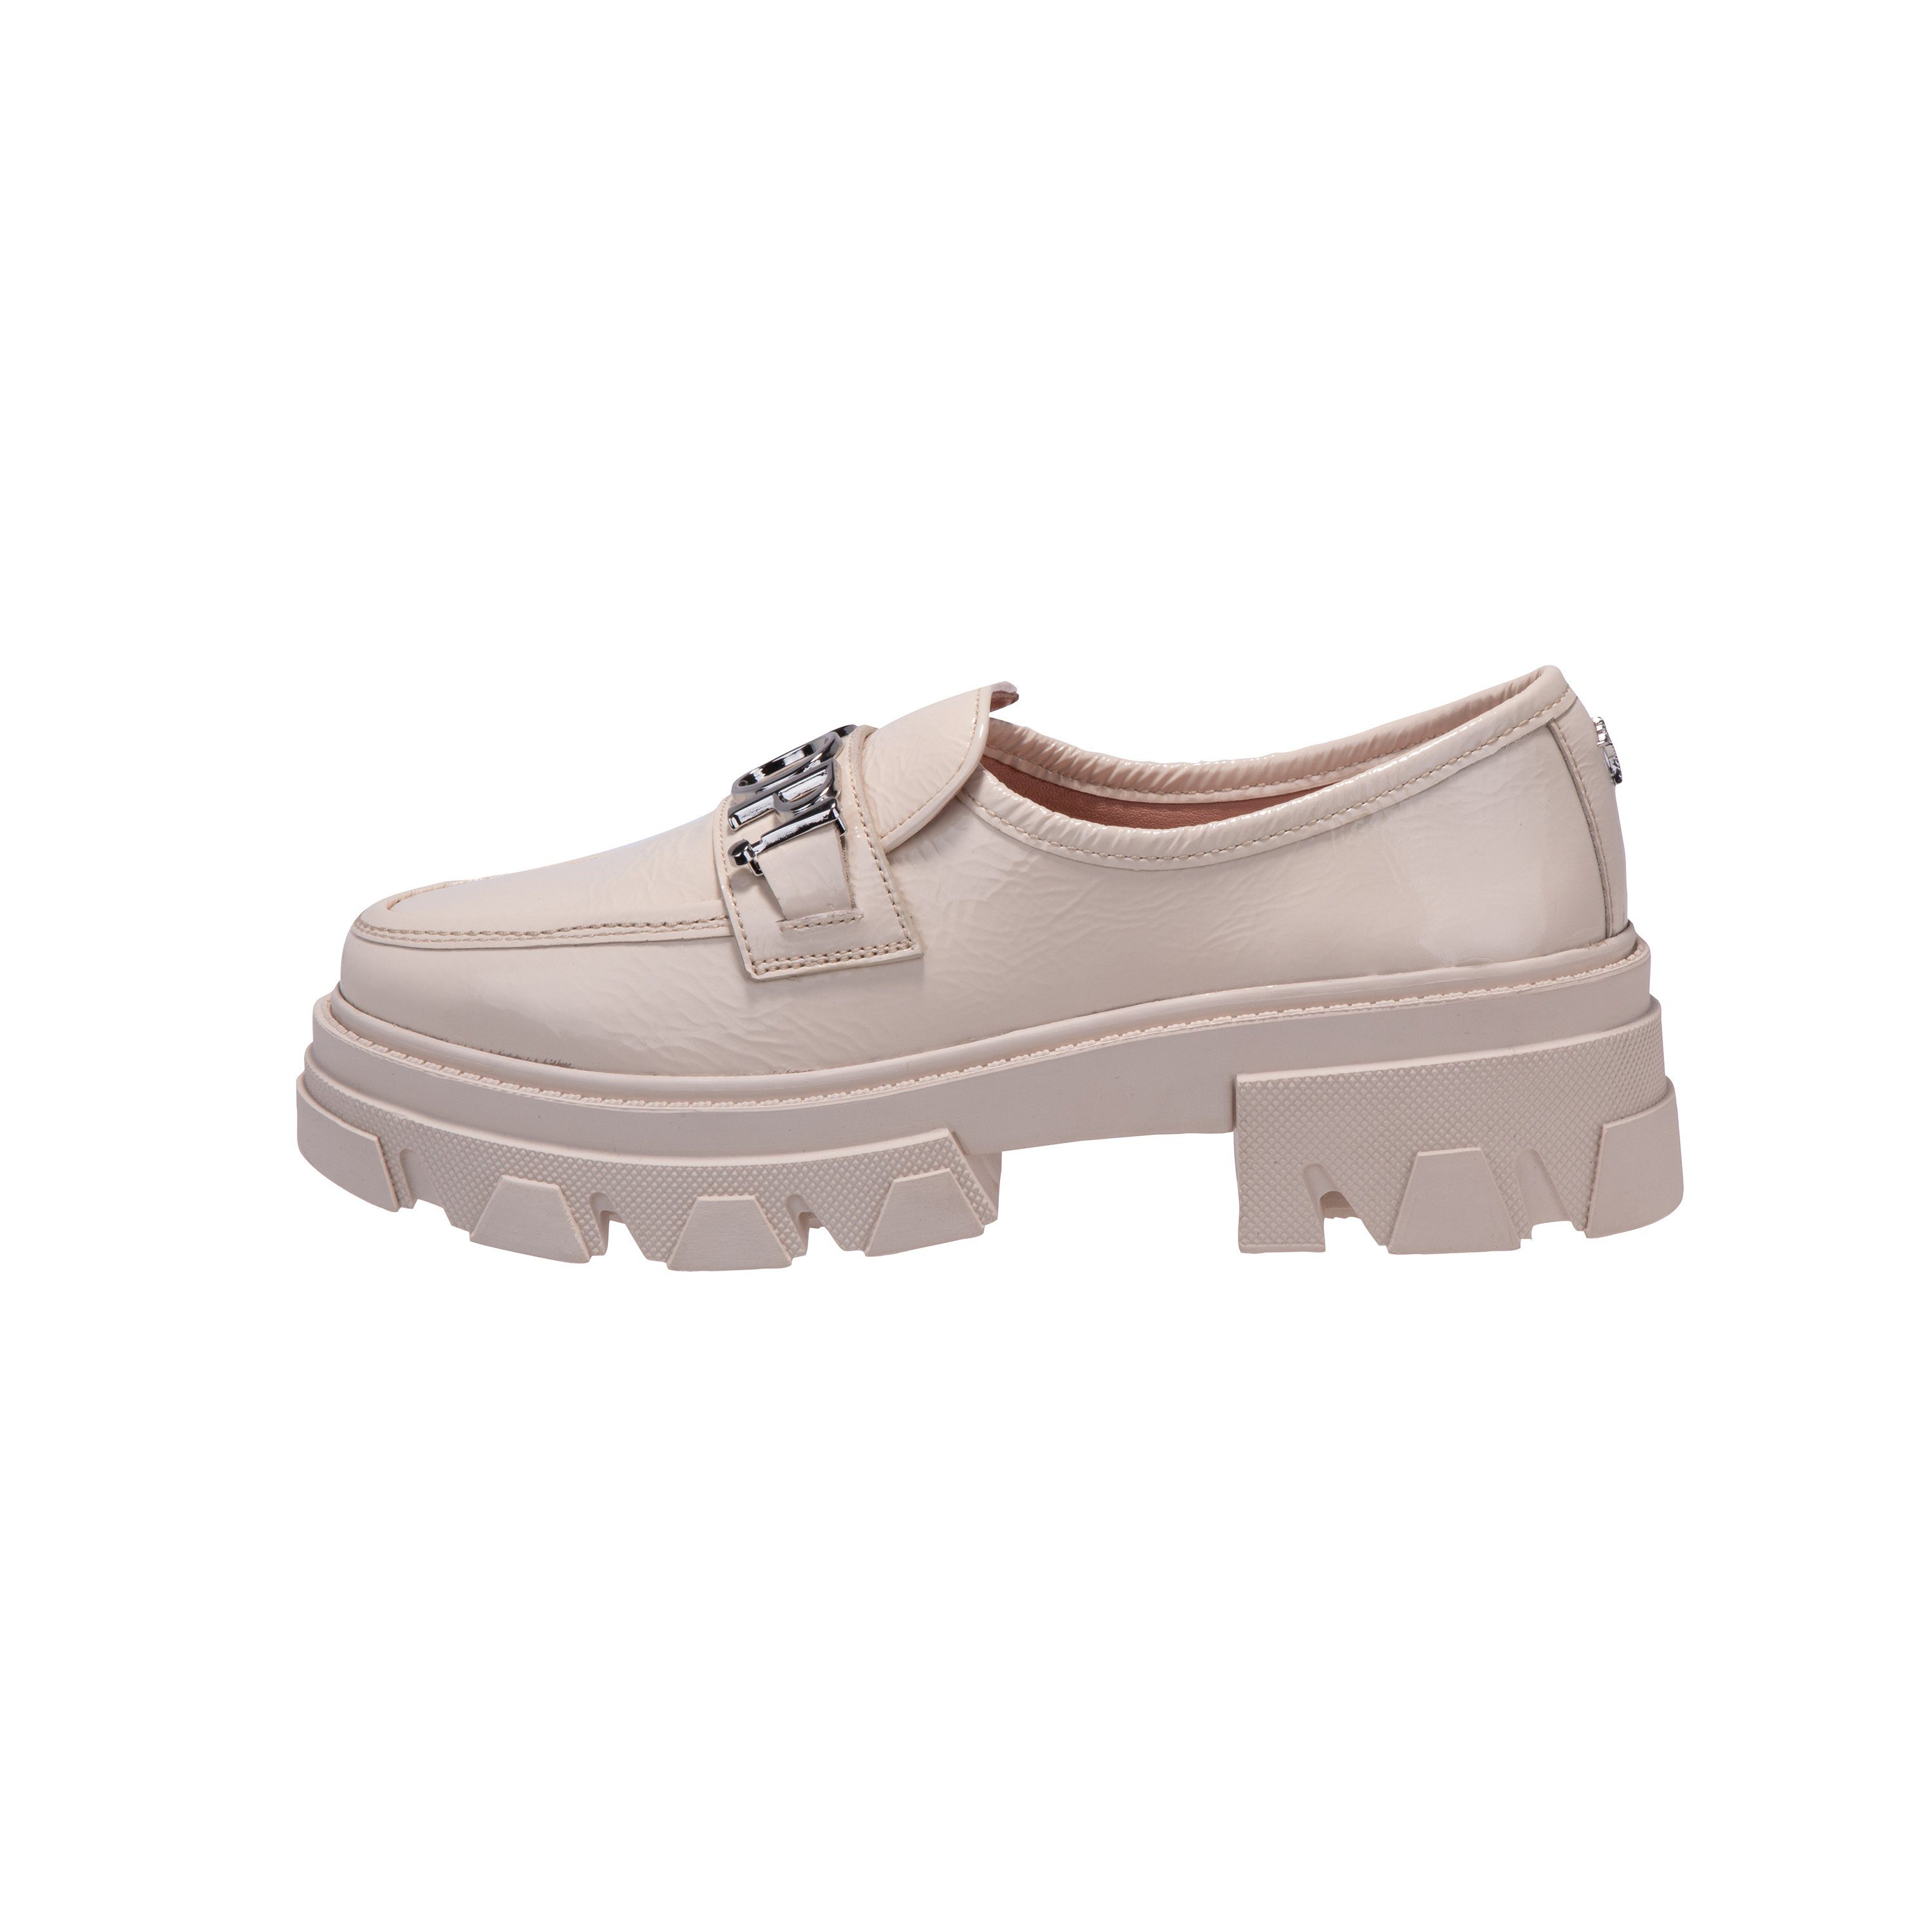 Joop! Slipper outer: cow leather, inner: cow leather white